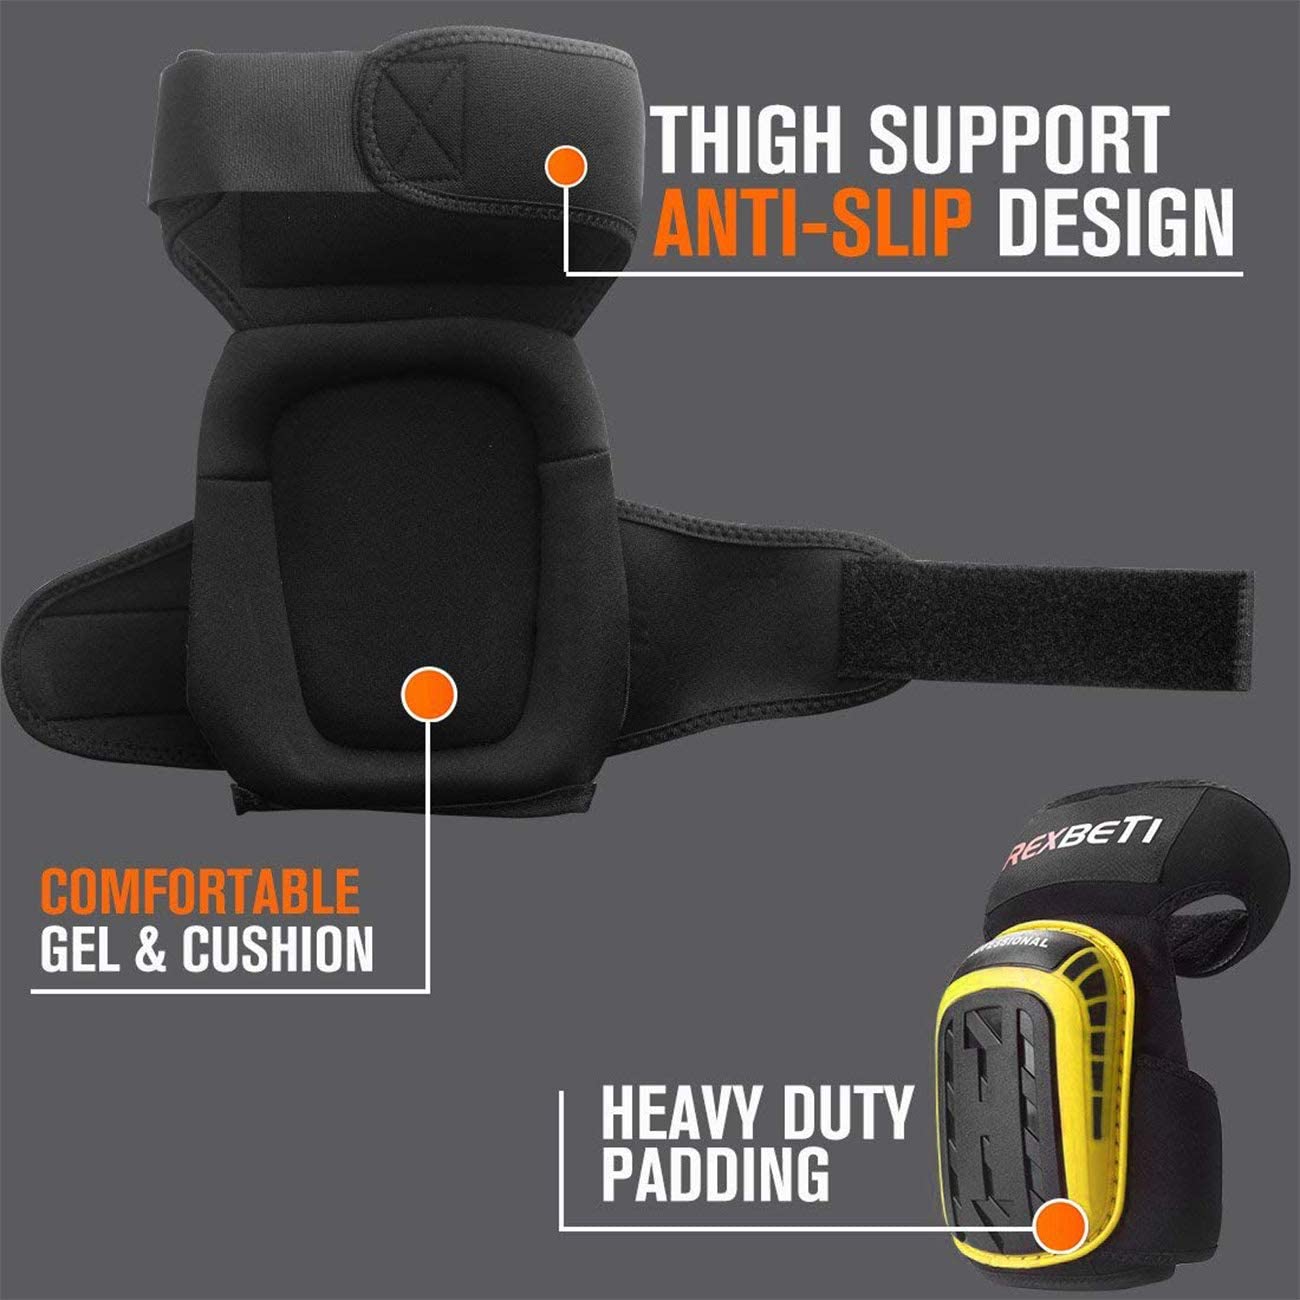 REXBETI Professional Construction Safety Knee Pads for Work